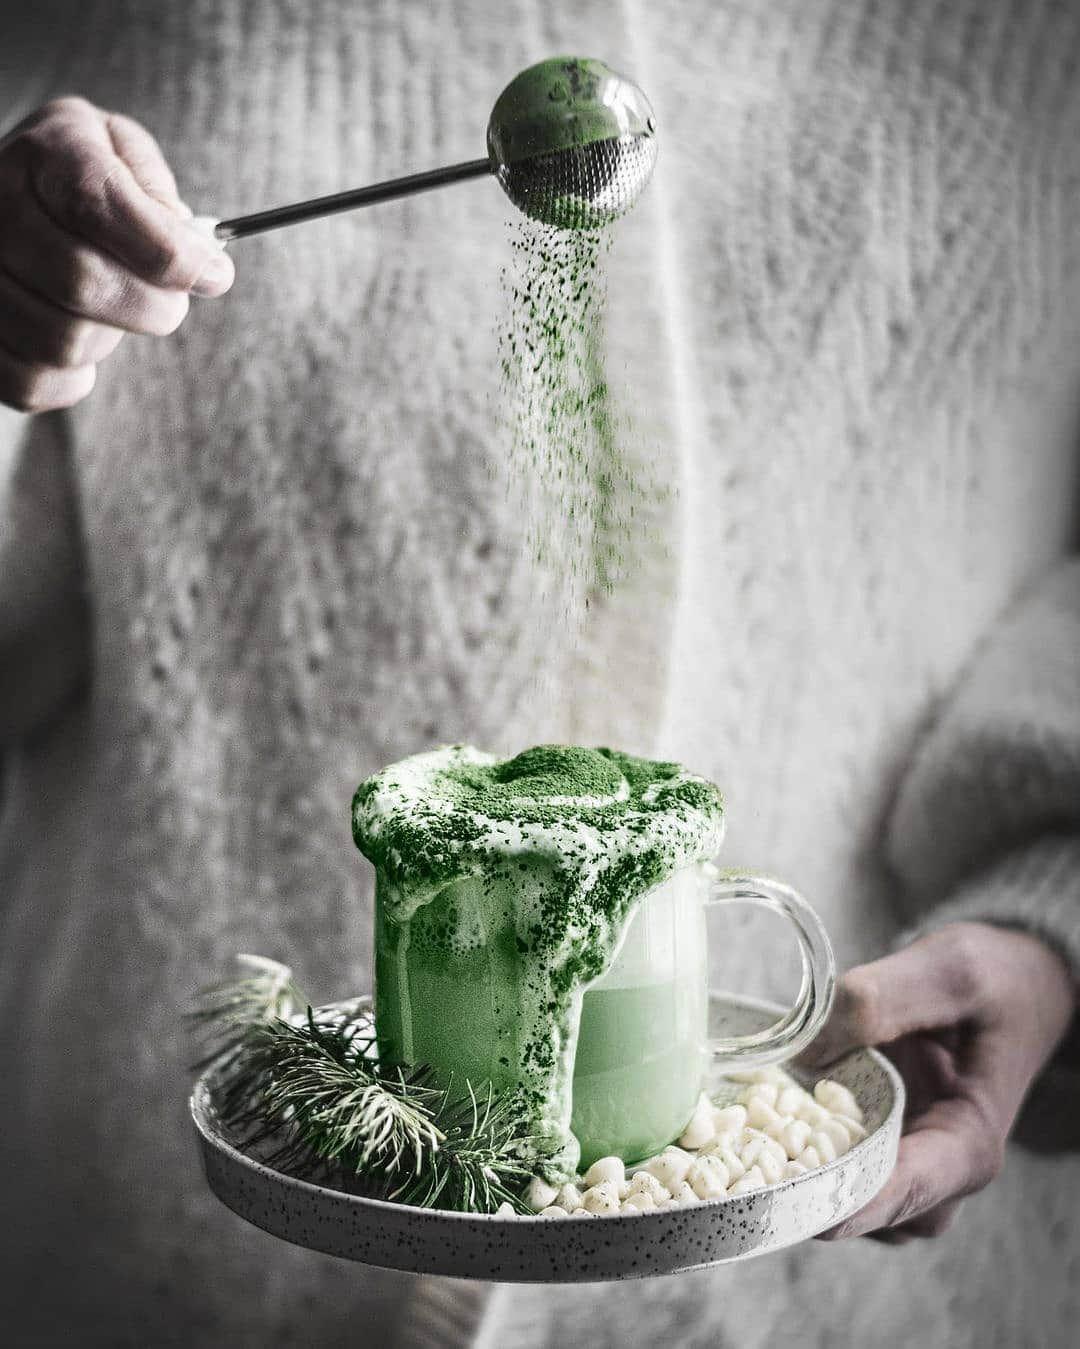 Matchæologist®のインスタグラム：「❄️ Winter evenings are made for #Matcha #HotChocolate with #Marshmallows. 🍵 Tag your #MatchaBesties who would enjoy this delicious #MatchaConcoction by @amandagryphon. . 🍵 Our Meiko™ Ceremonial Matcha is a perfect matcha grade for use in any premium matcha drinks like this one! . Tag us @Matchaeologist in your photos or videos 📷 – we’d LOVE to see your #MatchaCreations! . Check our bio link 👉 @Matchaeologist . Matchæologist® #Matchaeologist Matchaeologist.com」